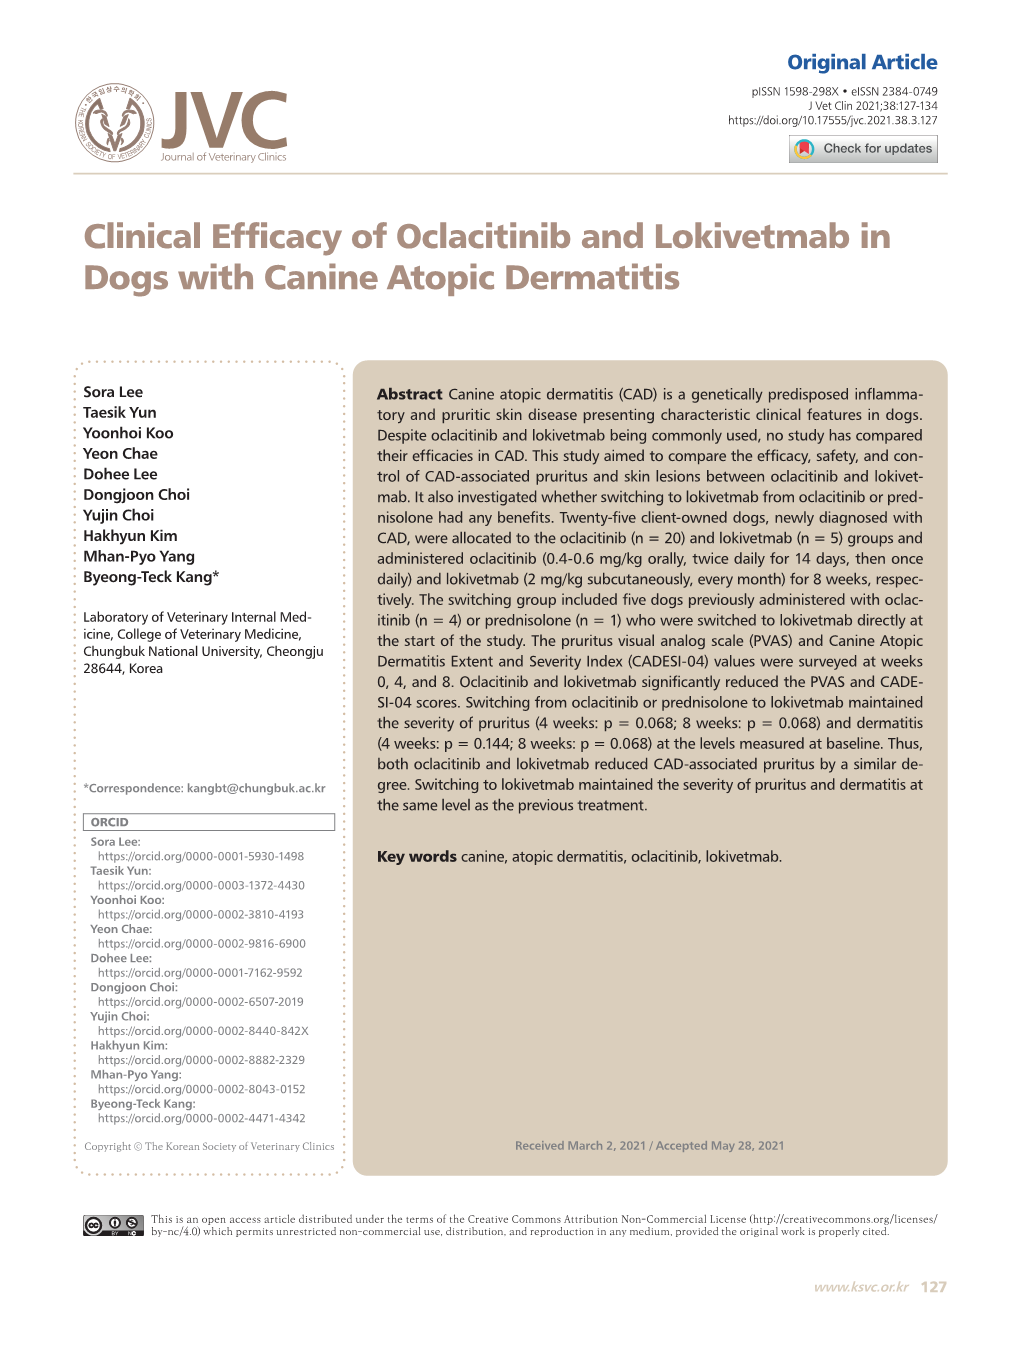 Clinical Efficacy of Oclacitinib and Lokivetmab in Dogs with Canine Atopic Dermatitis